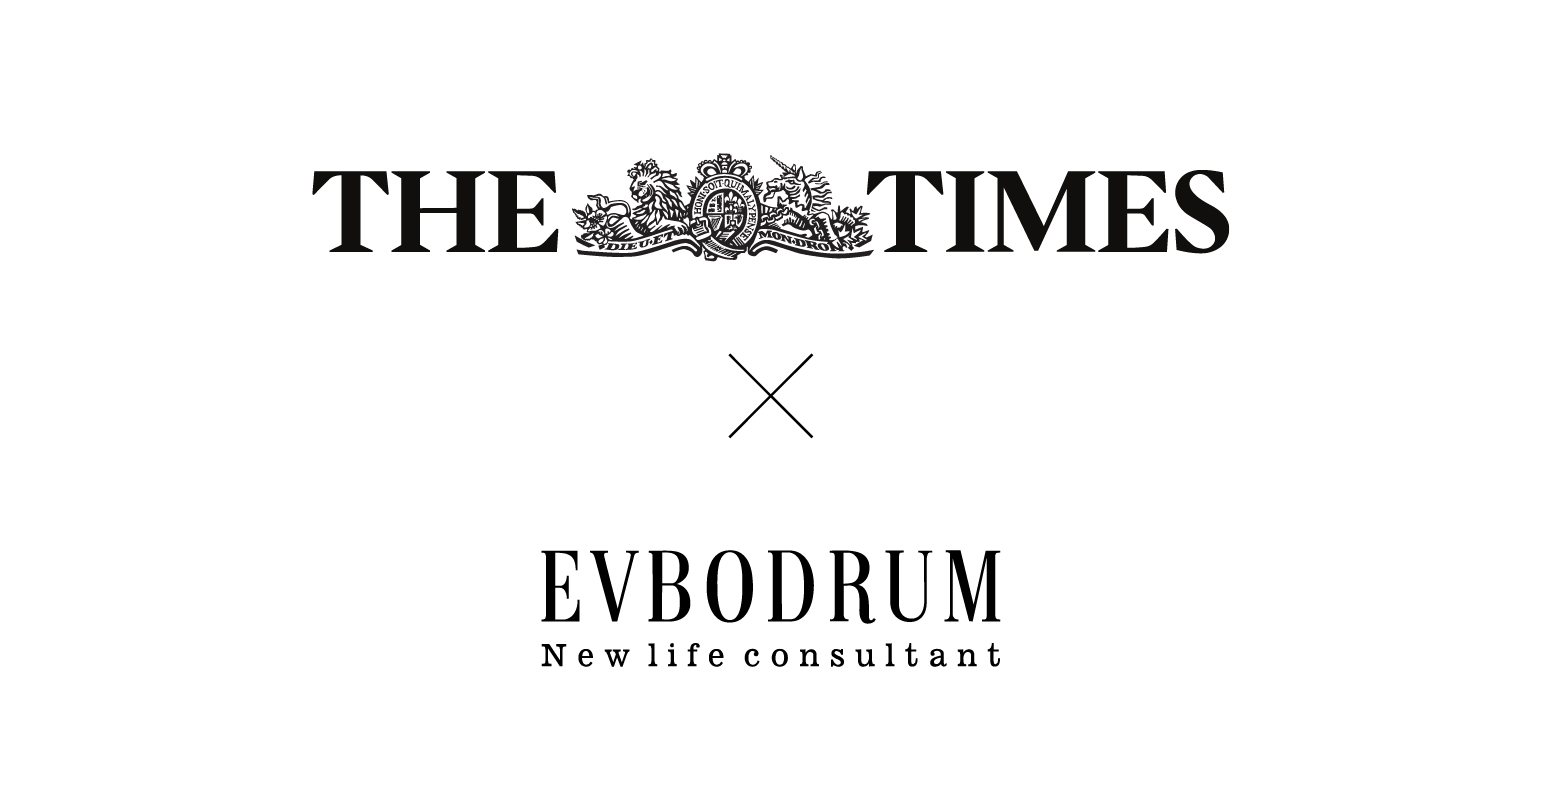 “The Times” article about Bodrum developing into an elegant luxury resort: